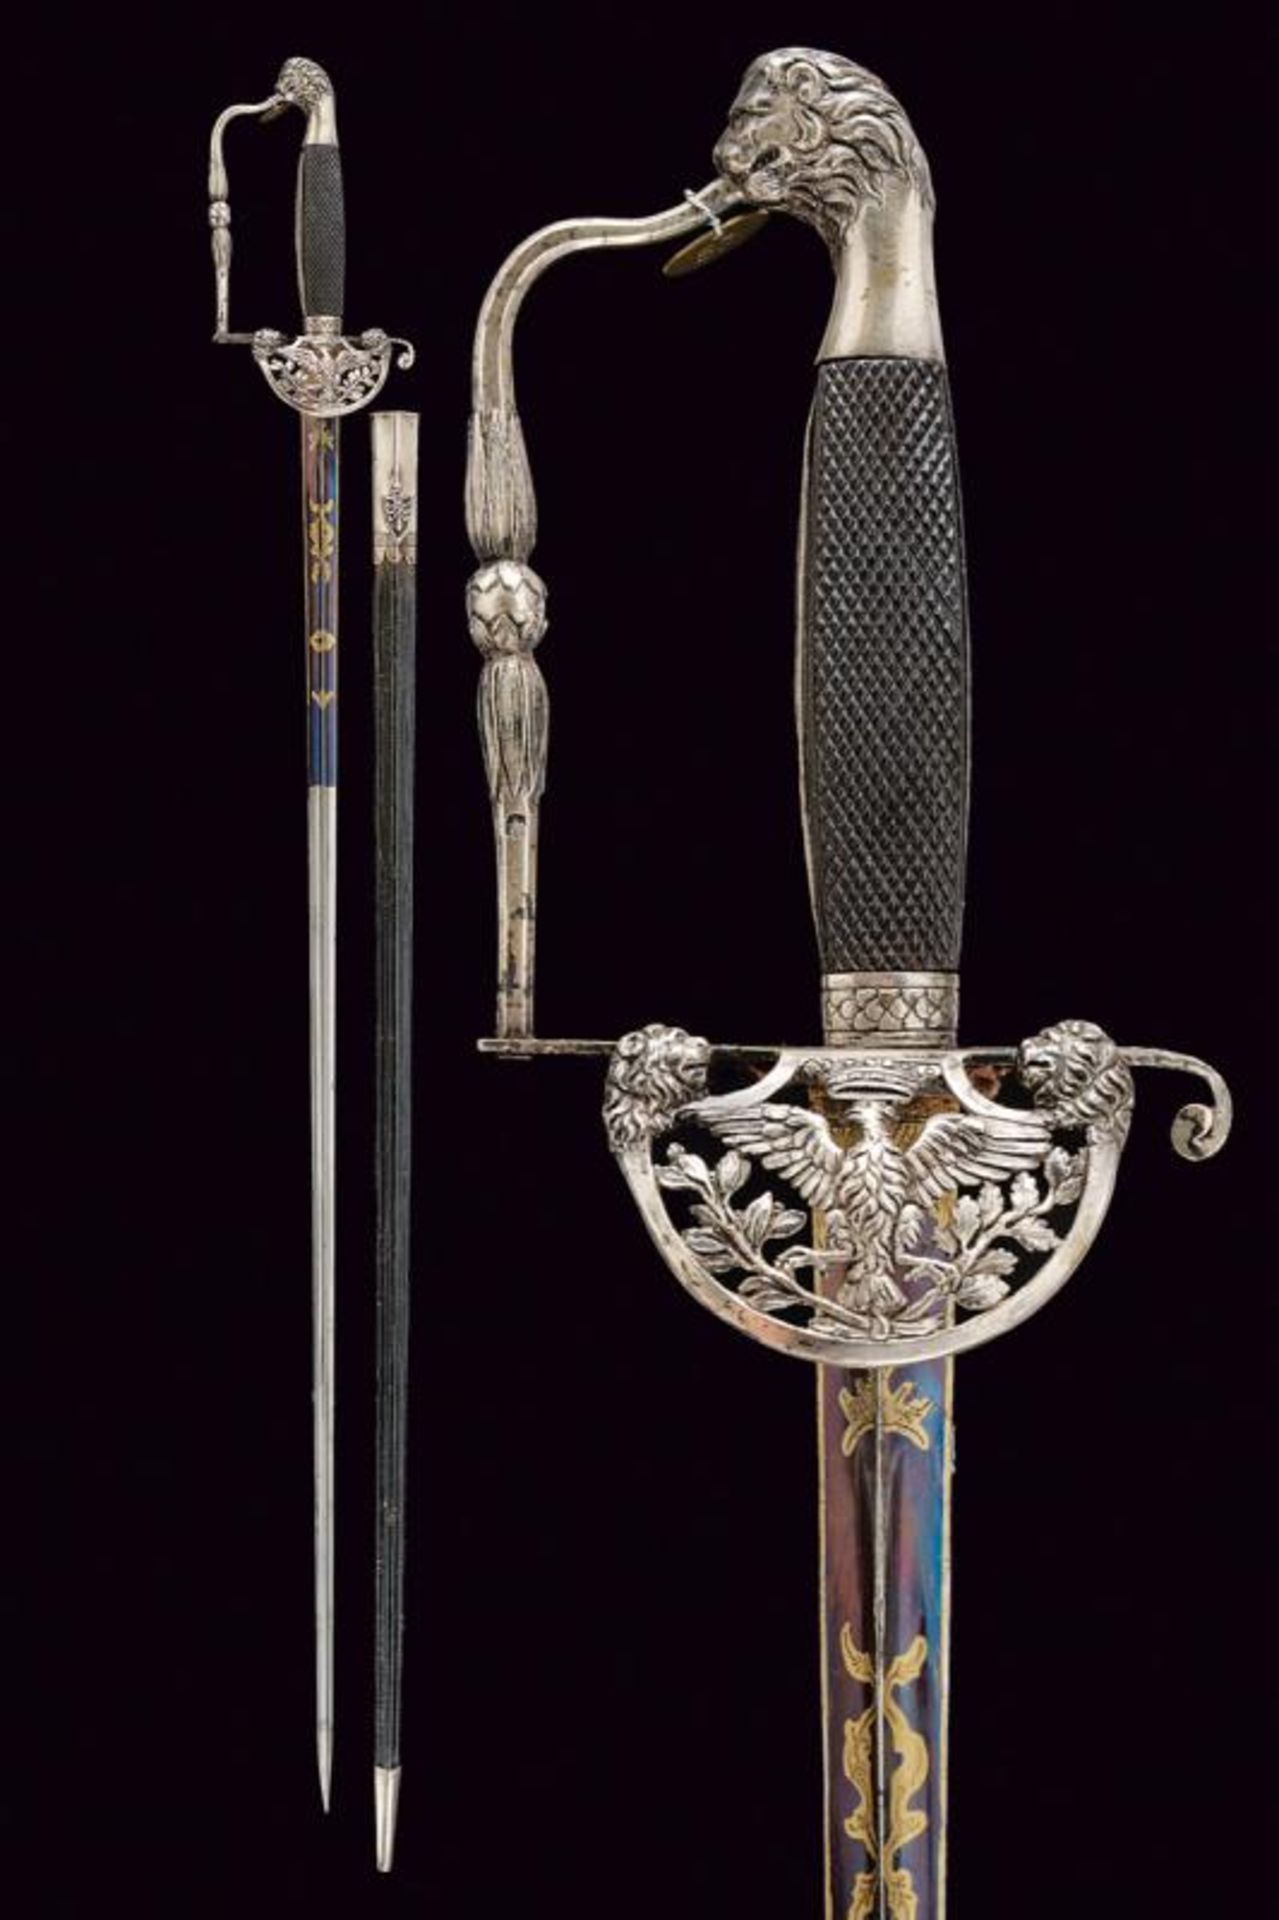 A small sword for a member of the Council of State